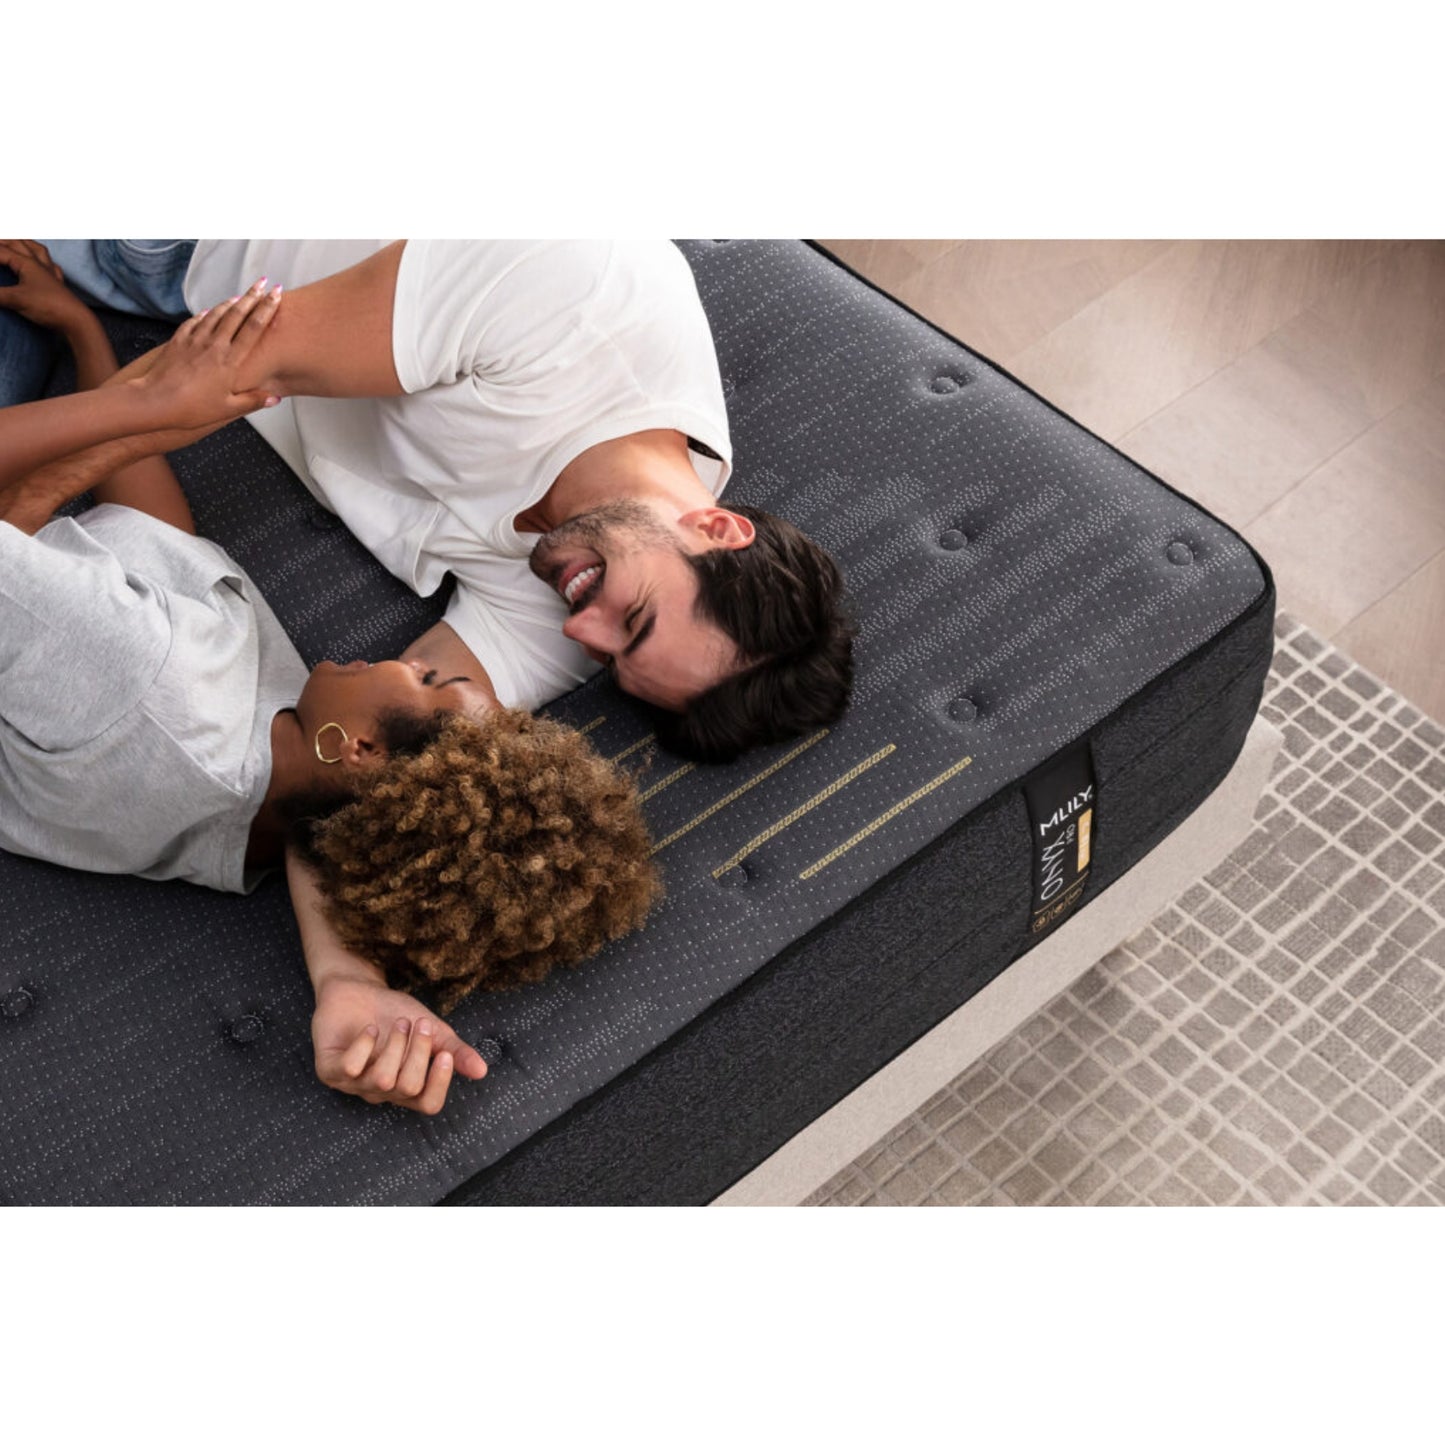 ONYX Pro 13" Hybrid Mattress With Copper Infused Memory Foam, Overhead View With A Man And Woman Expressing Their Love